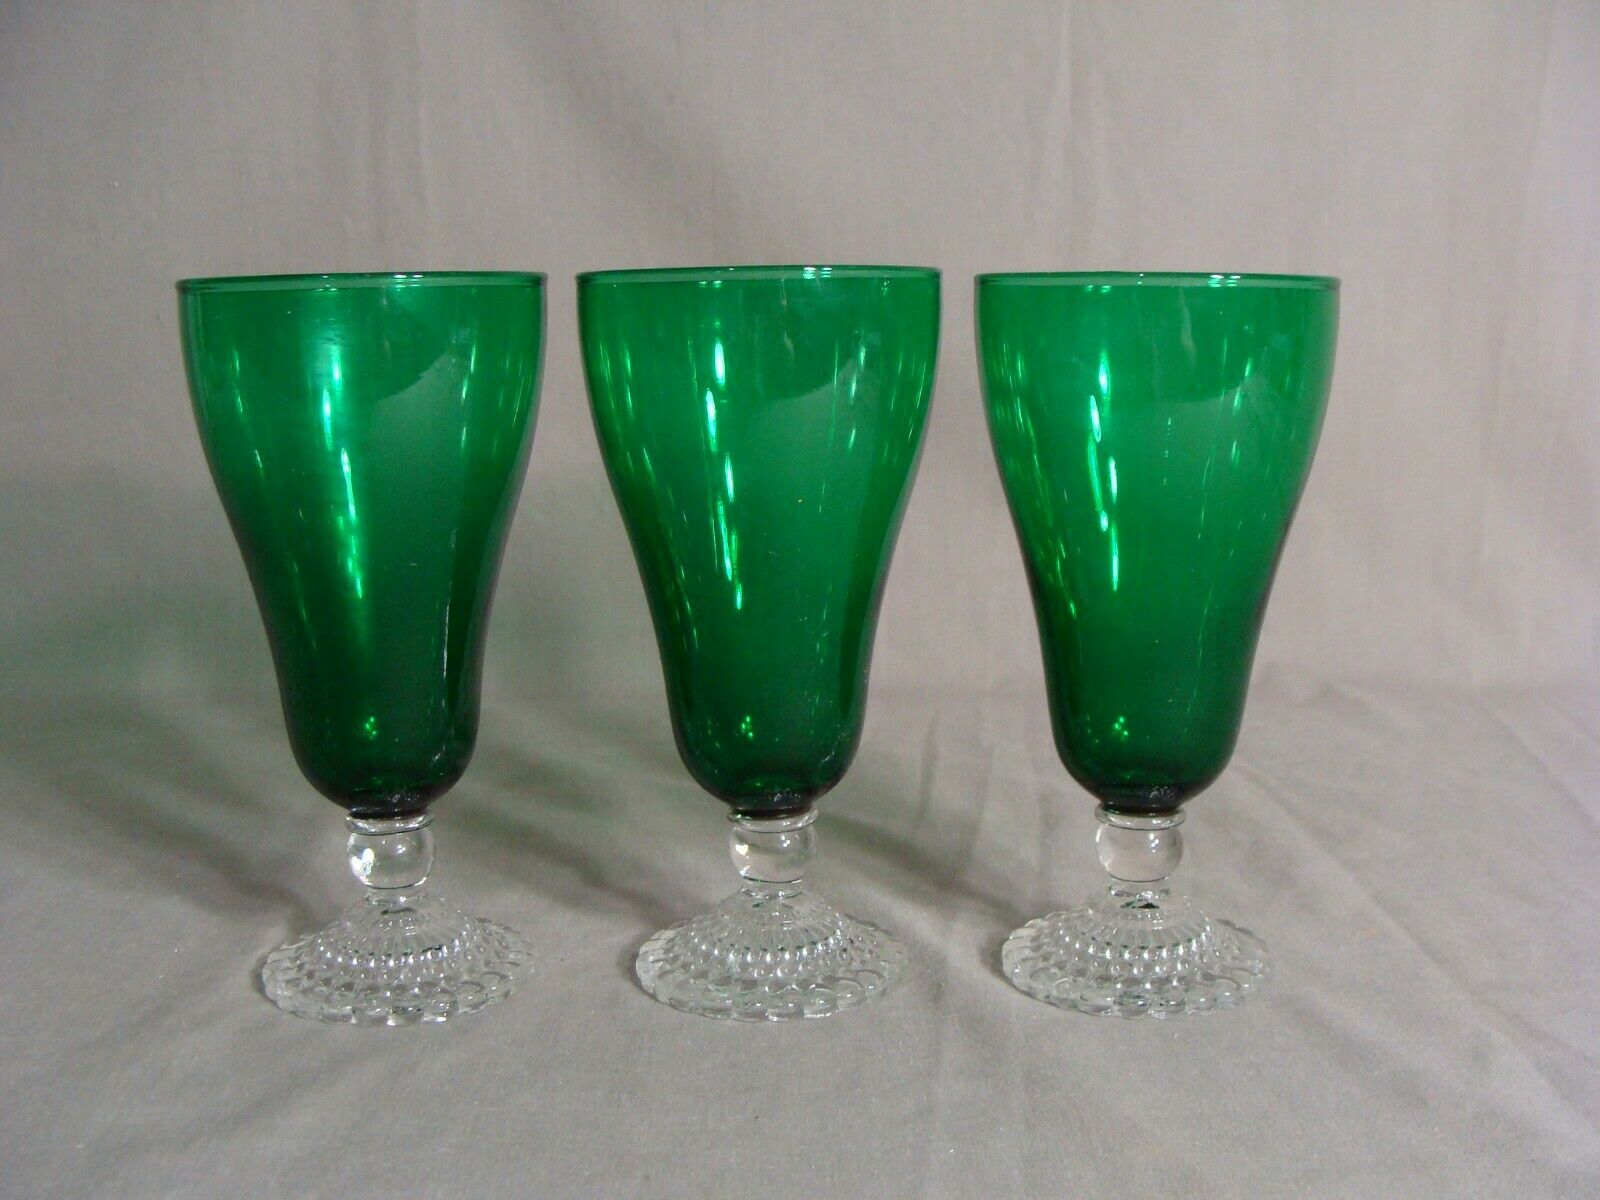 3 Anchor Hocking 12 Oz Iced Tea Goblets In The Bubble Foot Green Pattern